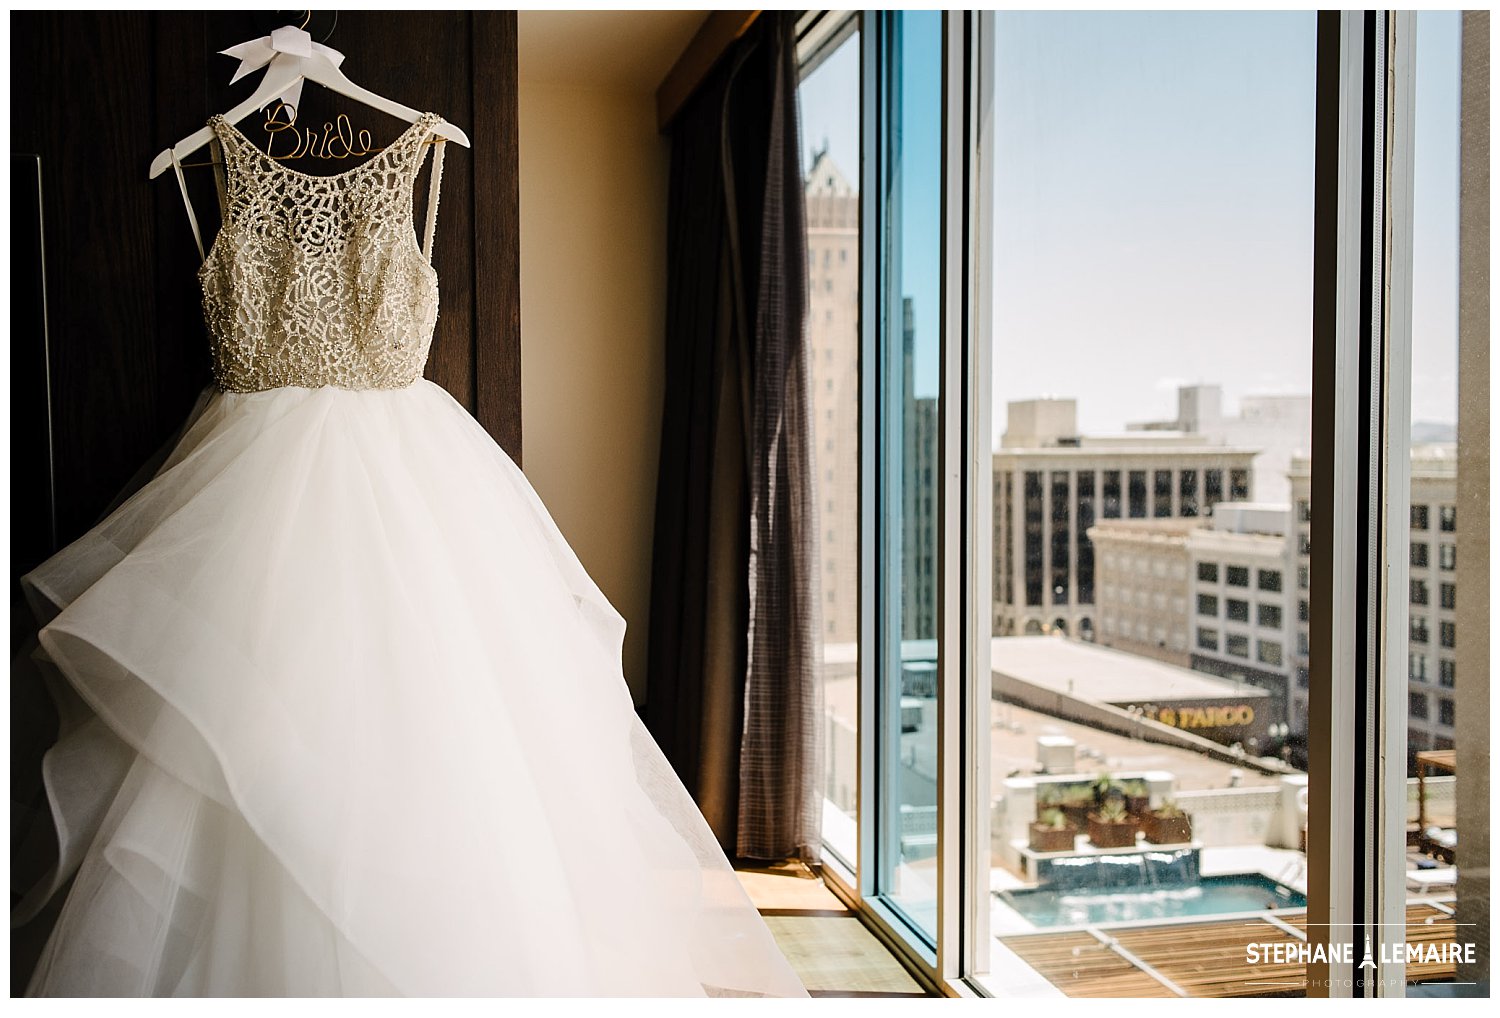 wedding dress at Hotel Indigo in el paso texas by stephane lemaire photography